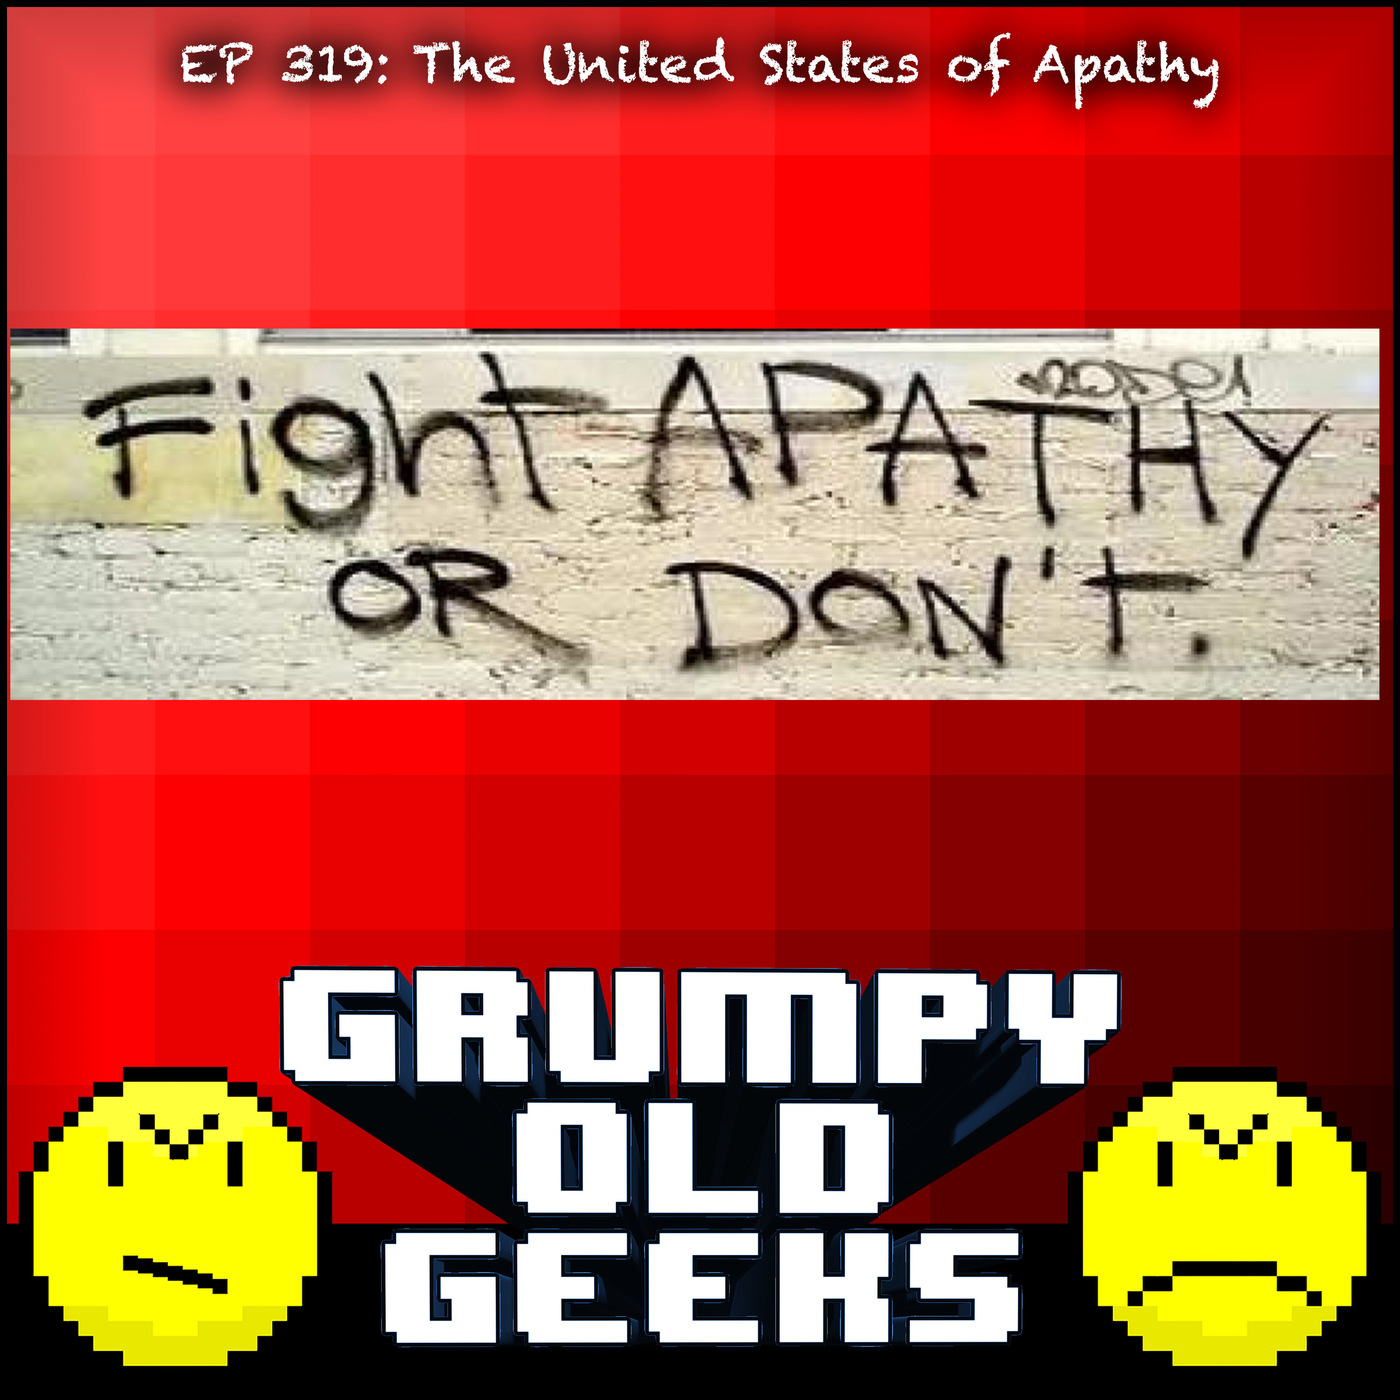 319: The United States of Apathy